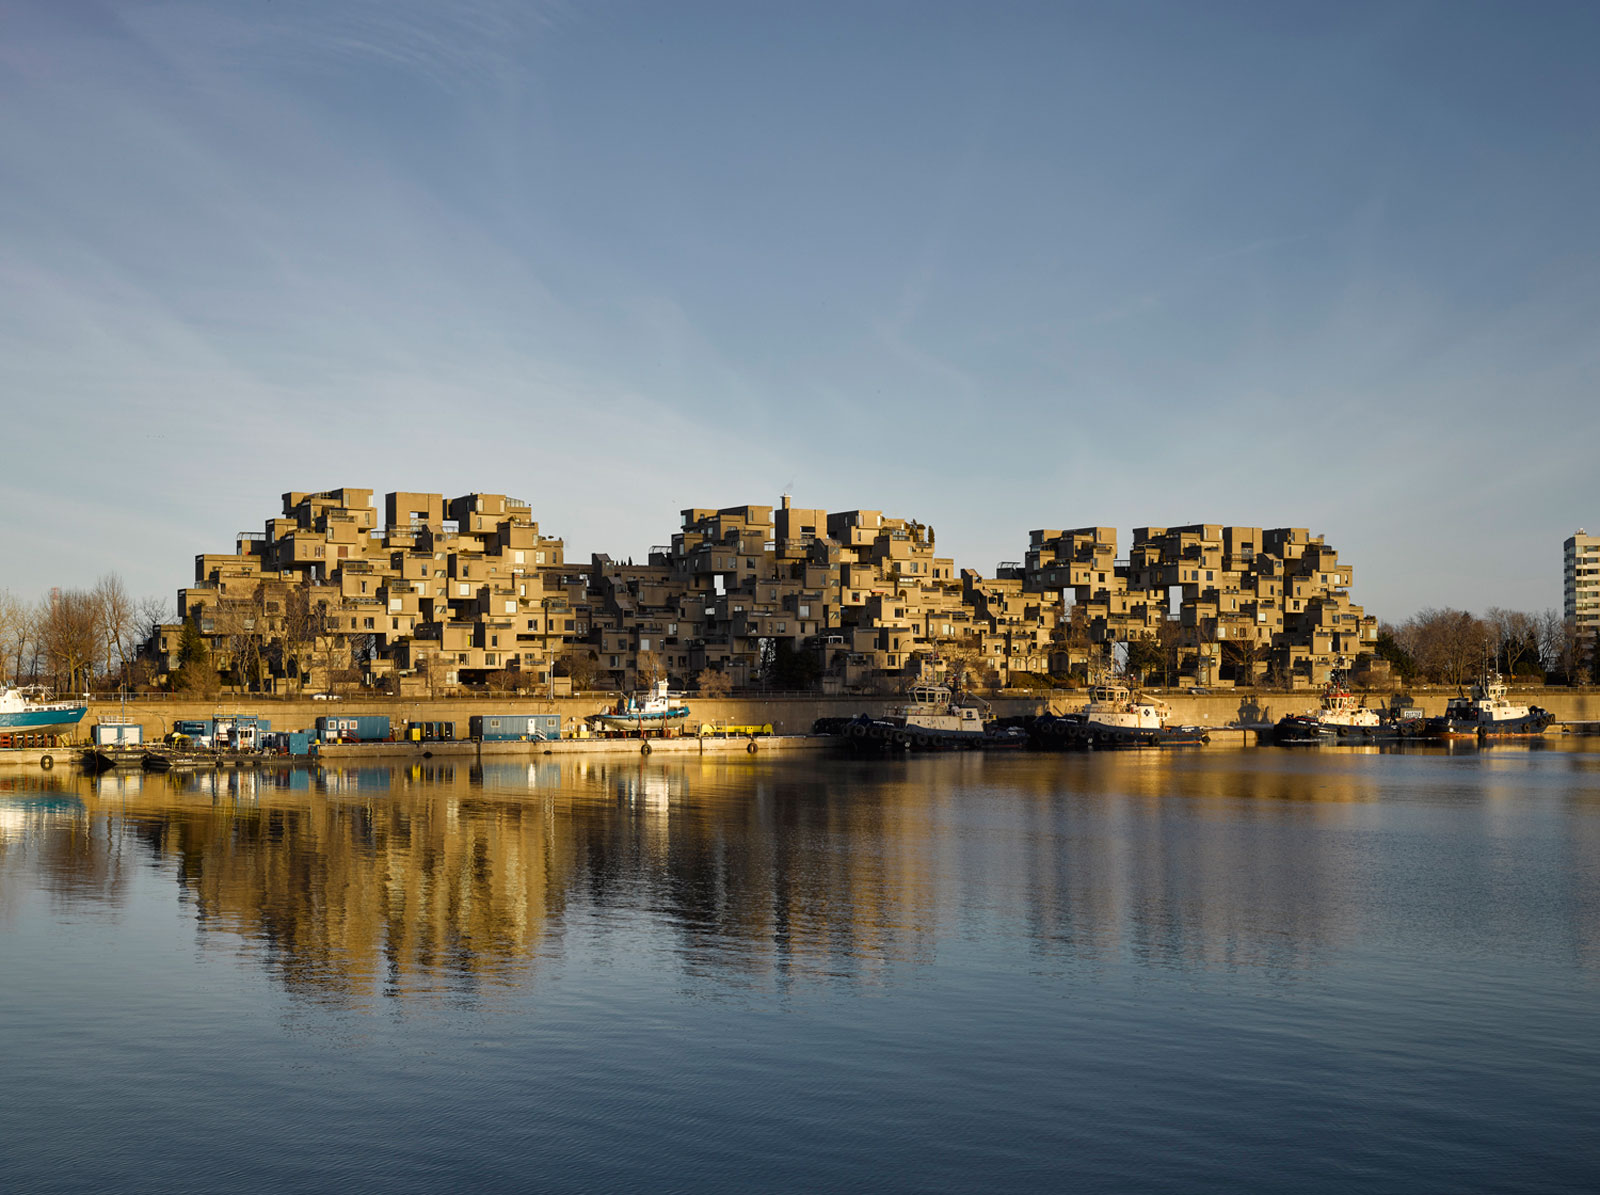 'Revisited: Habitat 67', by James Brittain